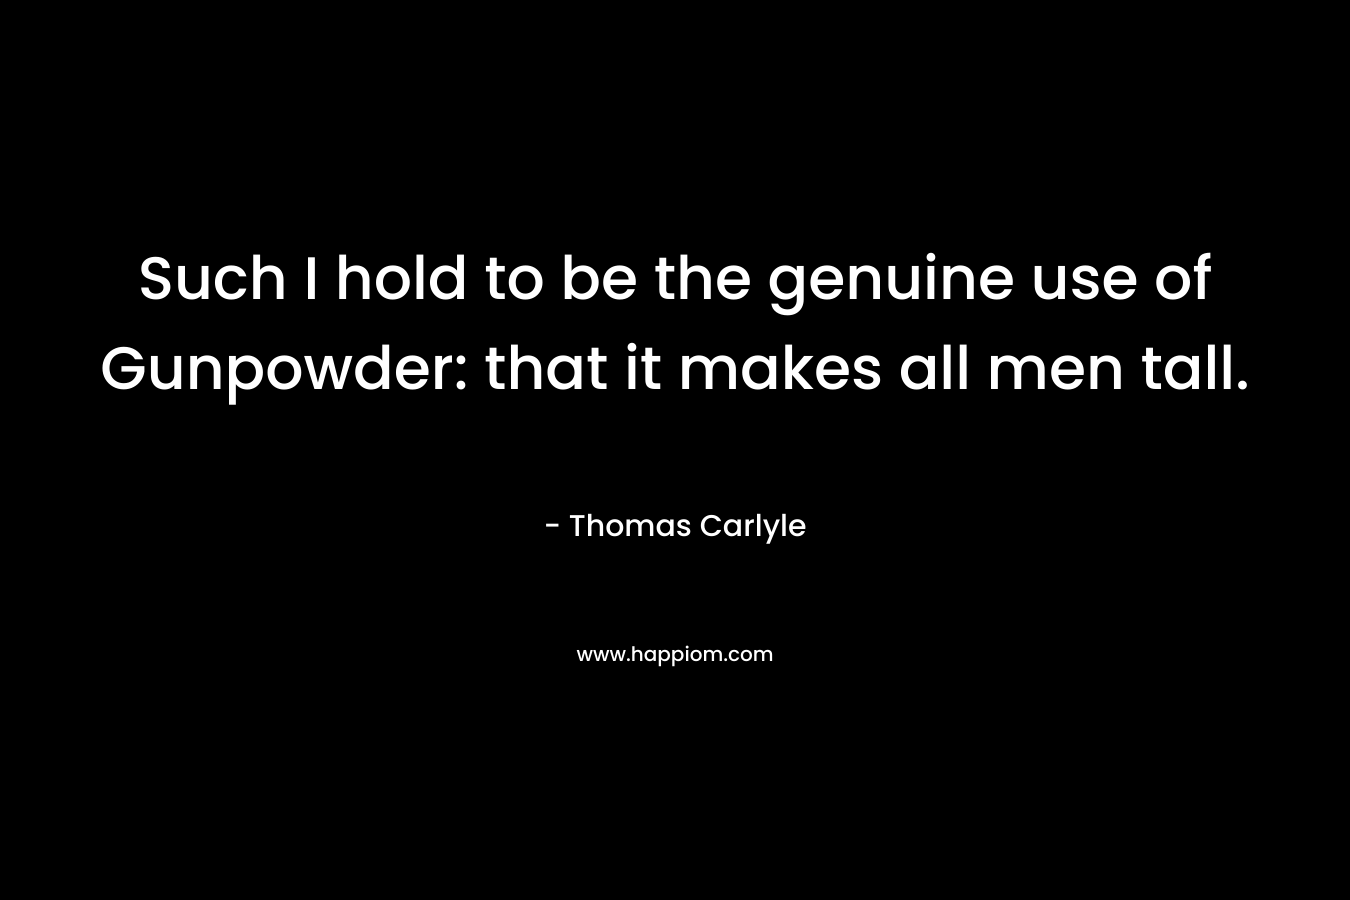 Such I hold to be the genuine use of Gunpowder: that it makes all men tall. – Thomas Carlyle